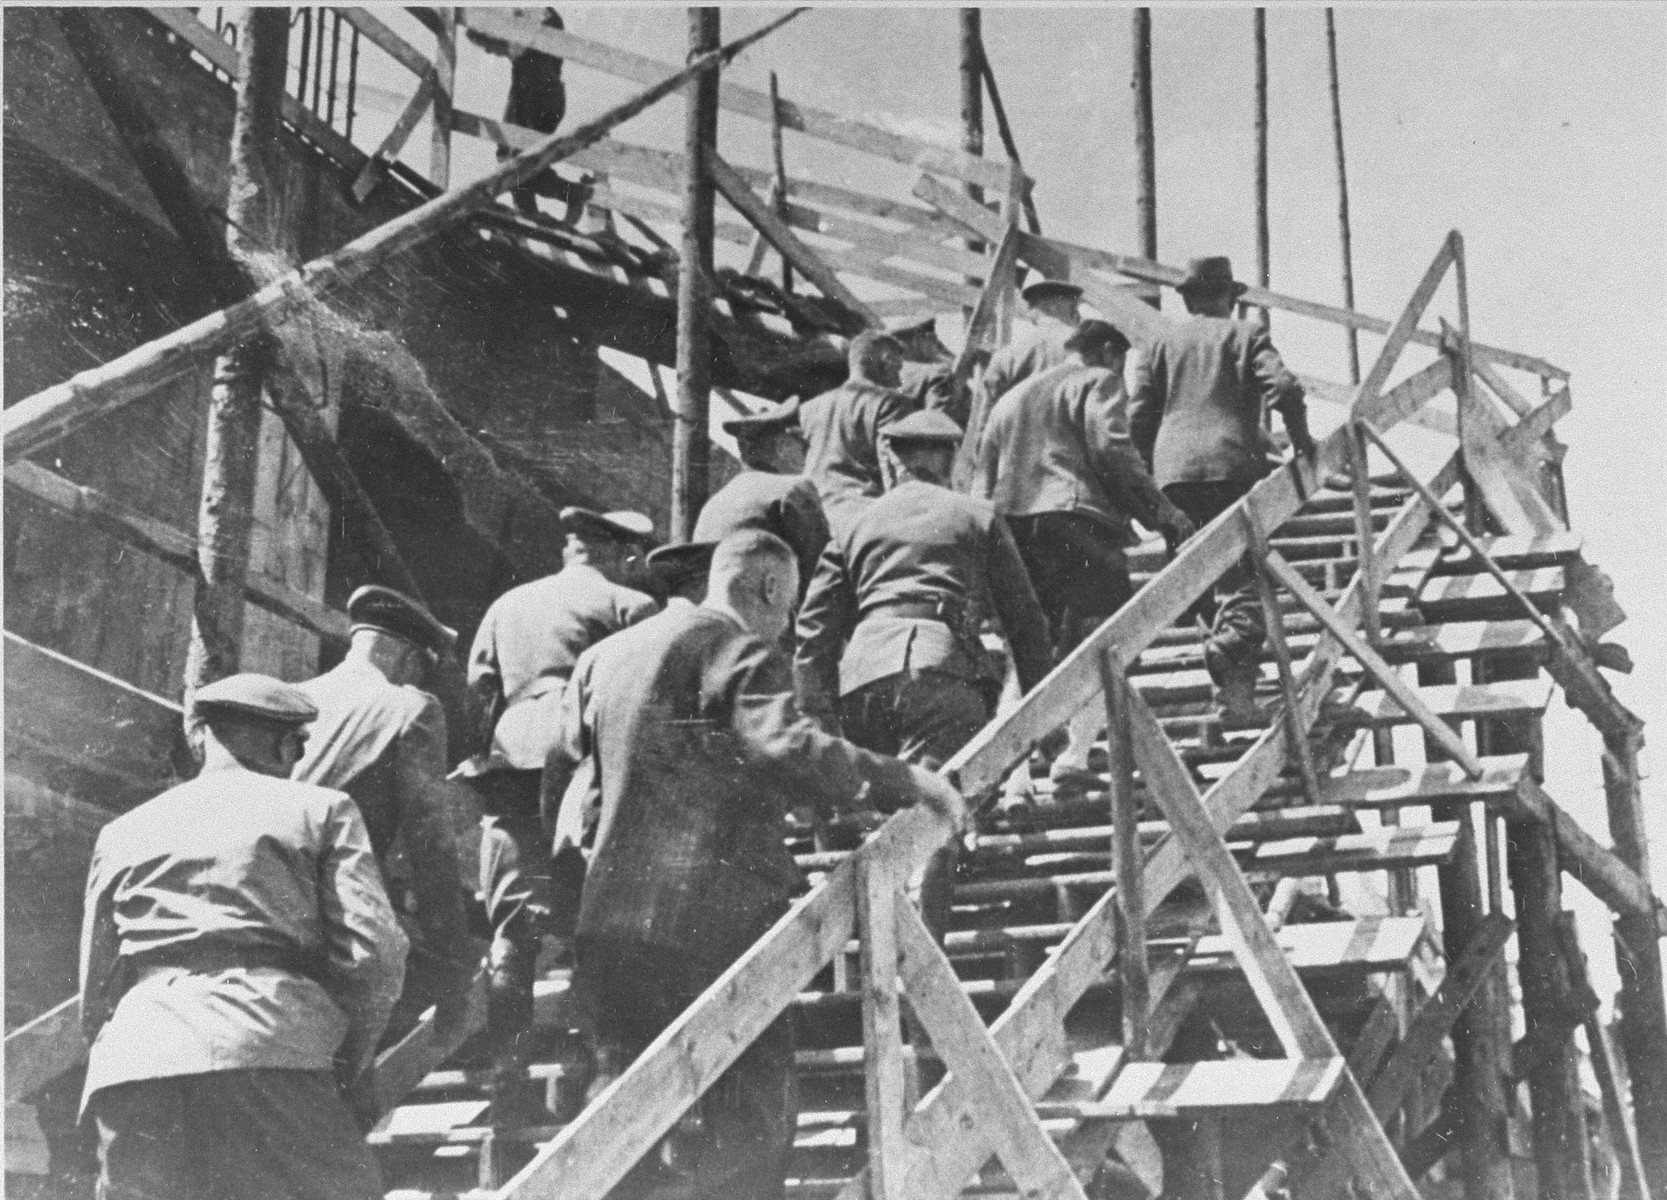 Reichsfuehrer SS Heinrich Himmler (top left) climbs a wooden staircase during a tour of the Monowitz-Buna building site in the company of Max Faust (top right). 

Faust, who was an IG Farben engineer, was the head of building operations at Monowitz-Buna.